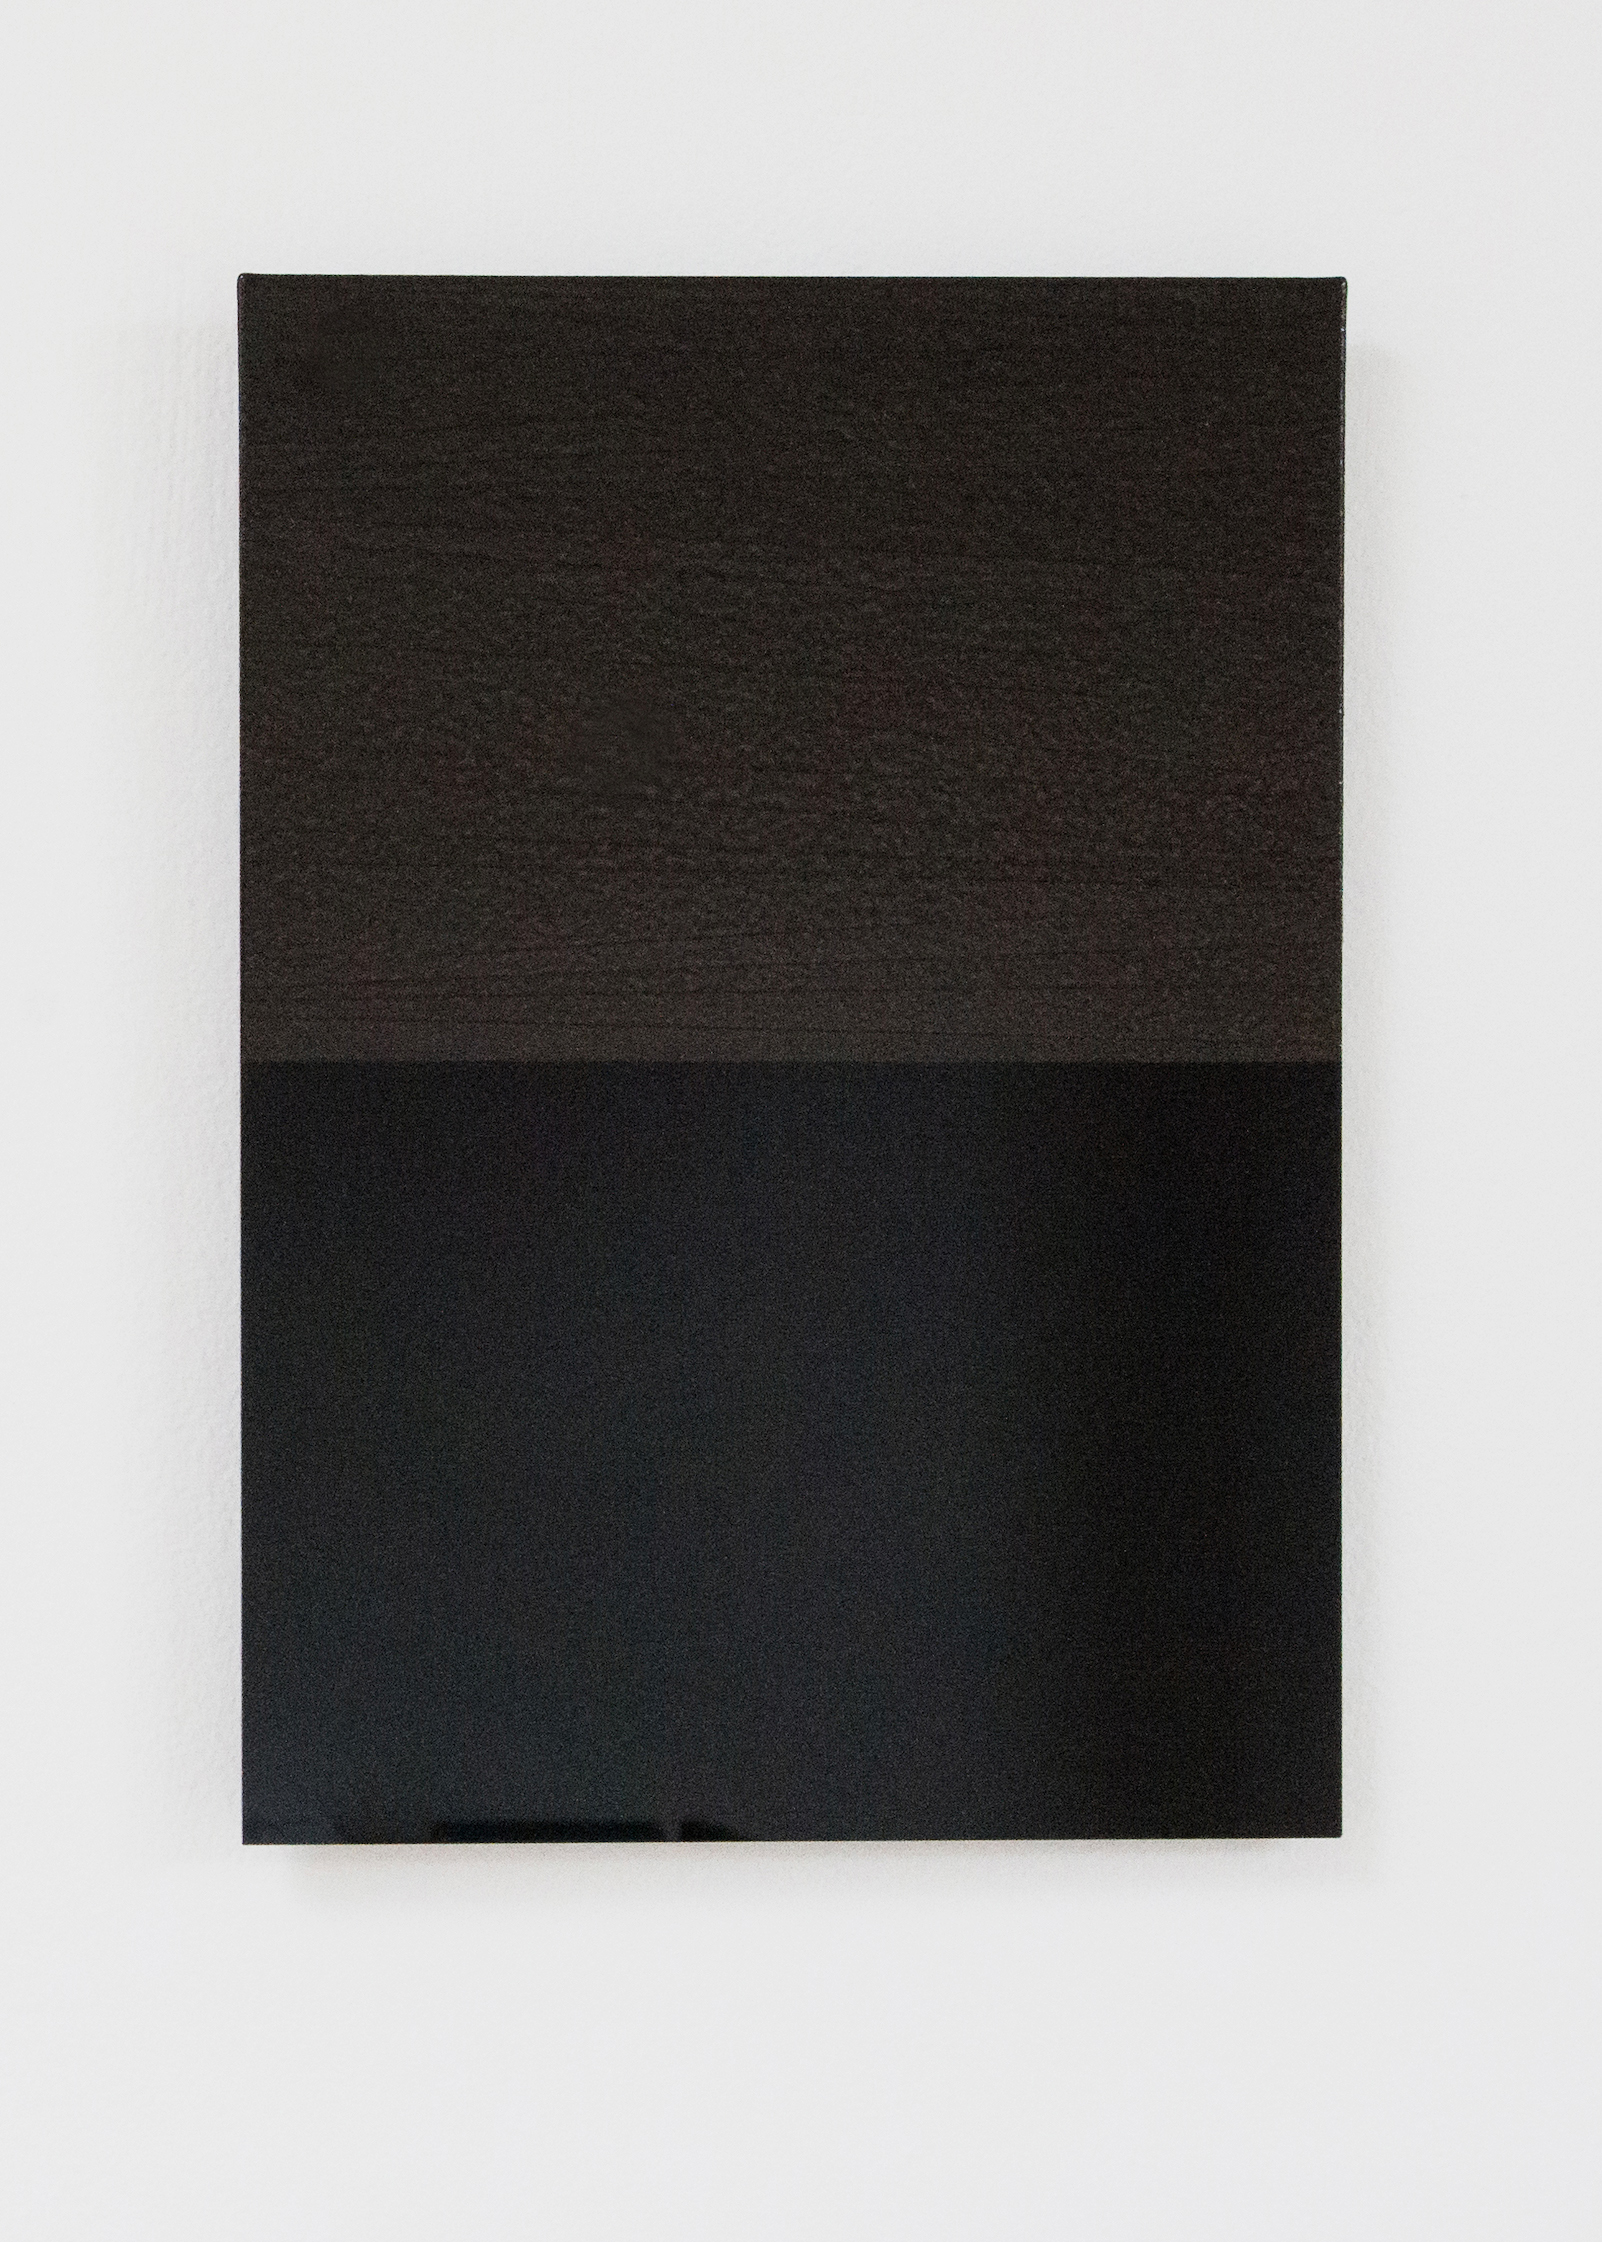  Anders Sletvold Moe. Black Letter Series, 2014. Oil and acrylic on plexi glass. 8.27 x 11.69      